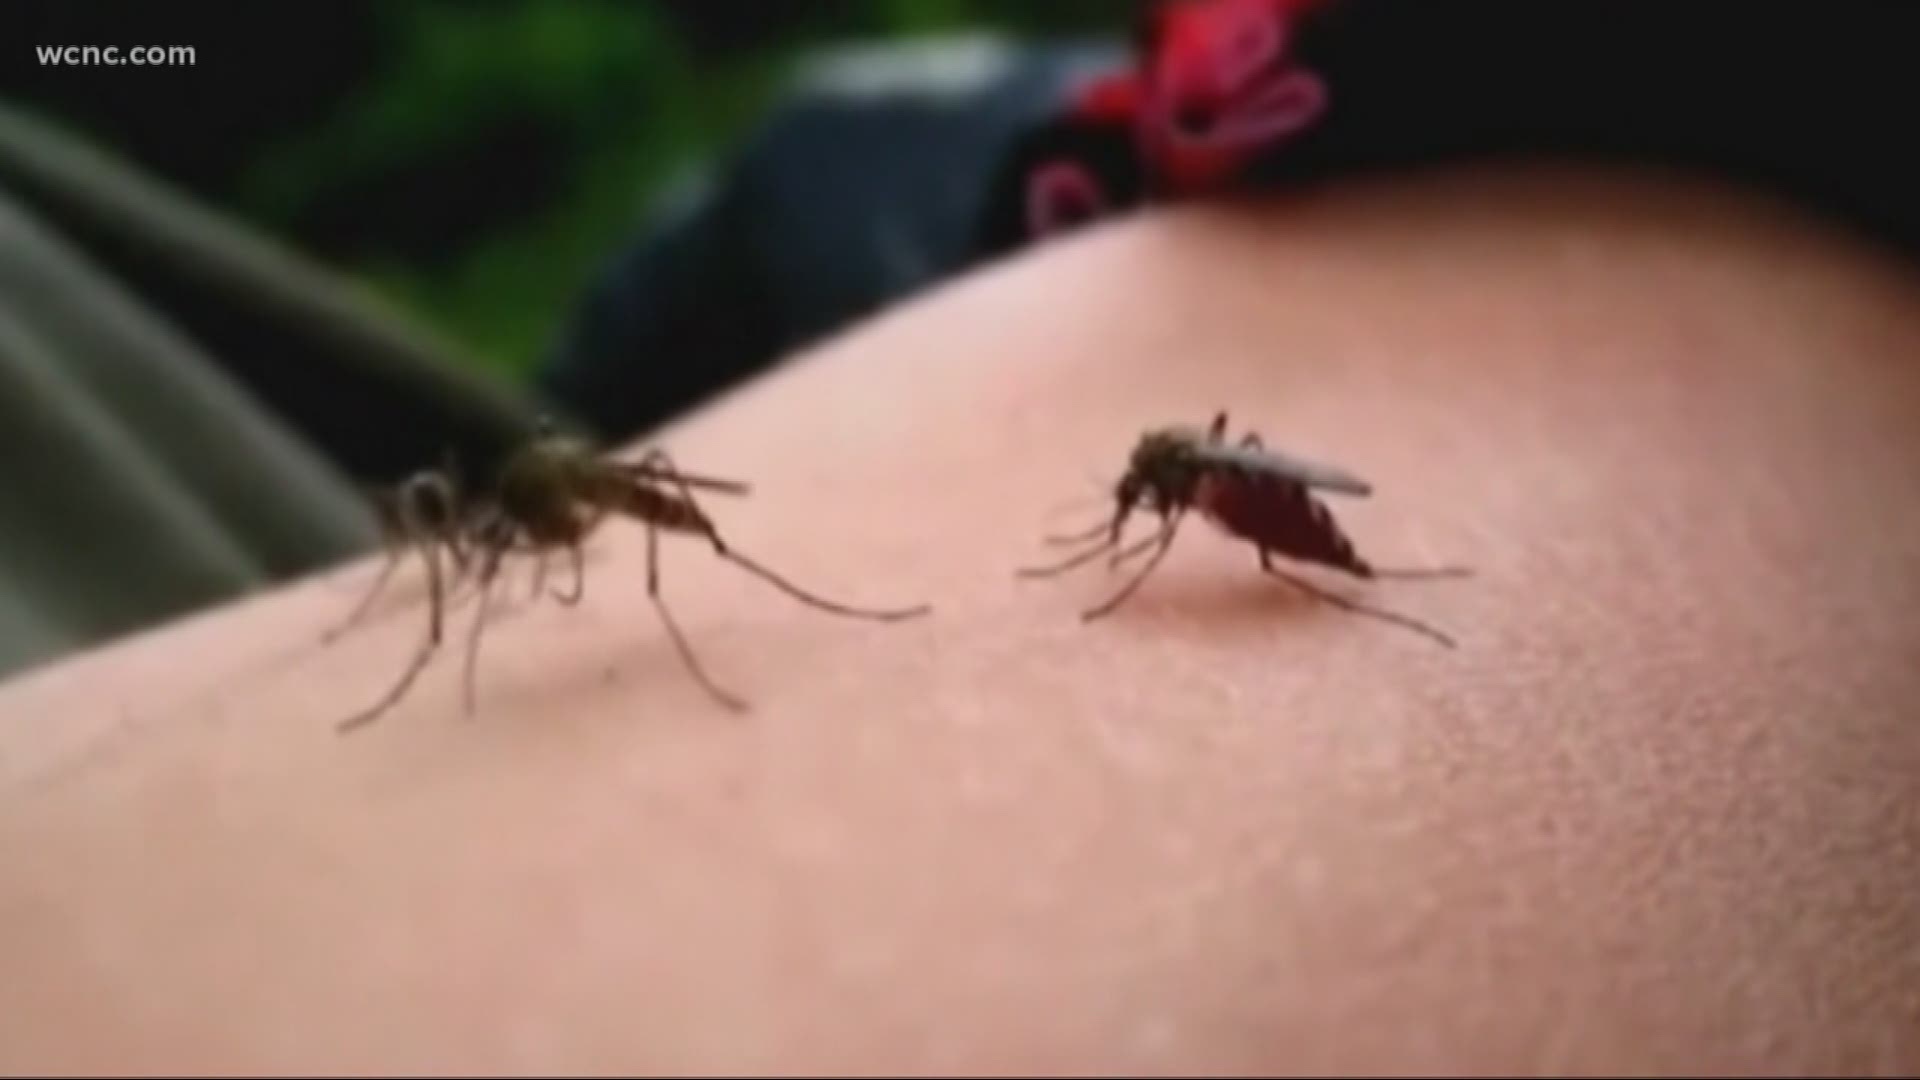 Some are scrambling to have yards treated after a mosquito in the Wilmington area tested positive for the West Nile virus. With all the summer storms, the most important thing to do is dump out any standing water.